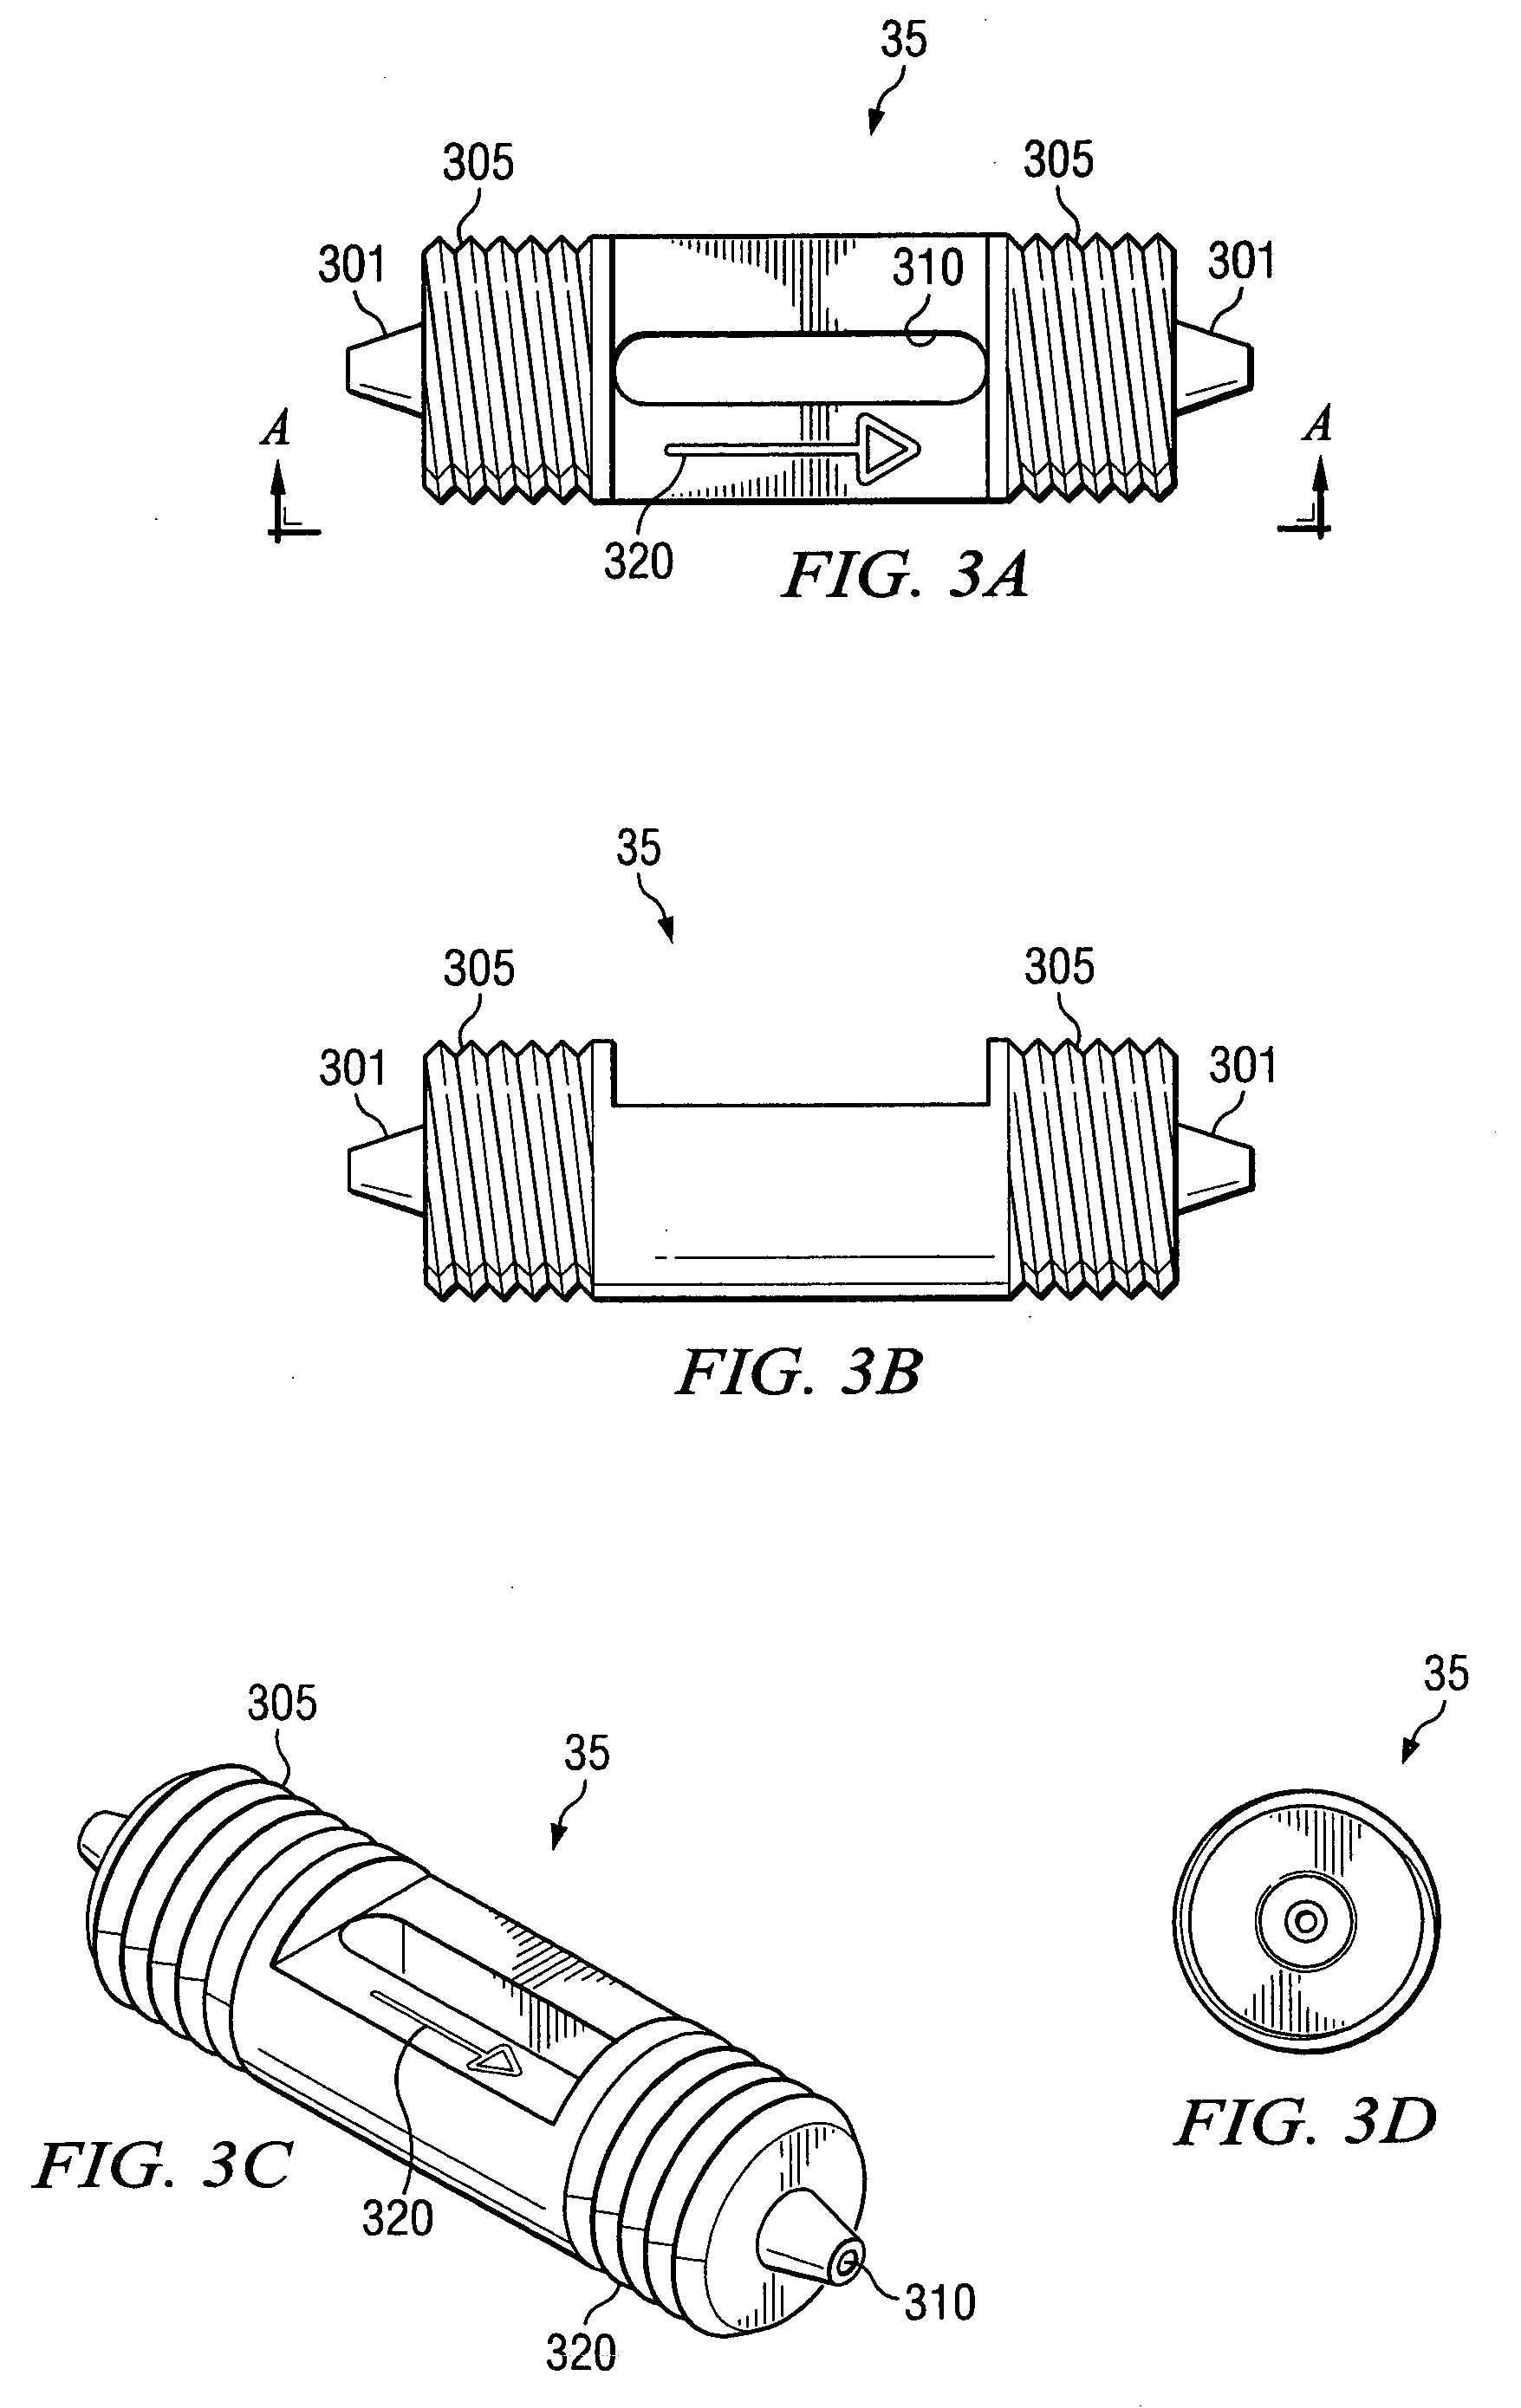 Apparatus and methods for electrospray applications